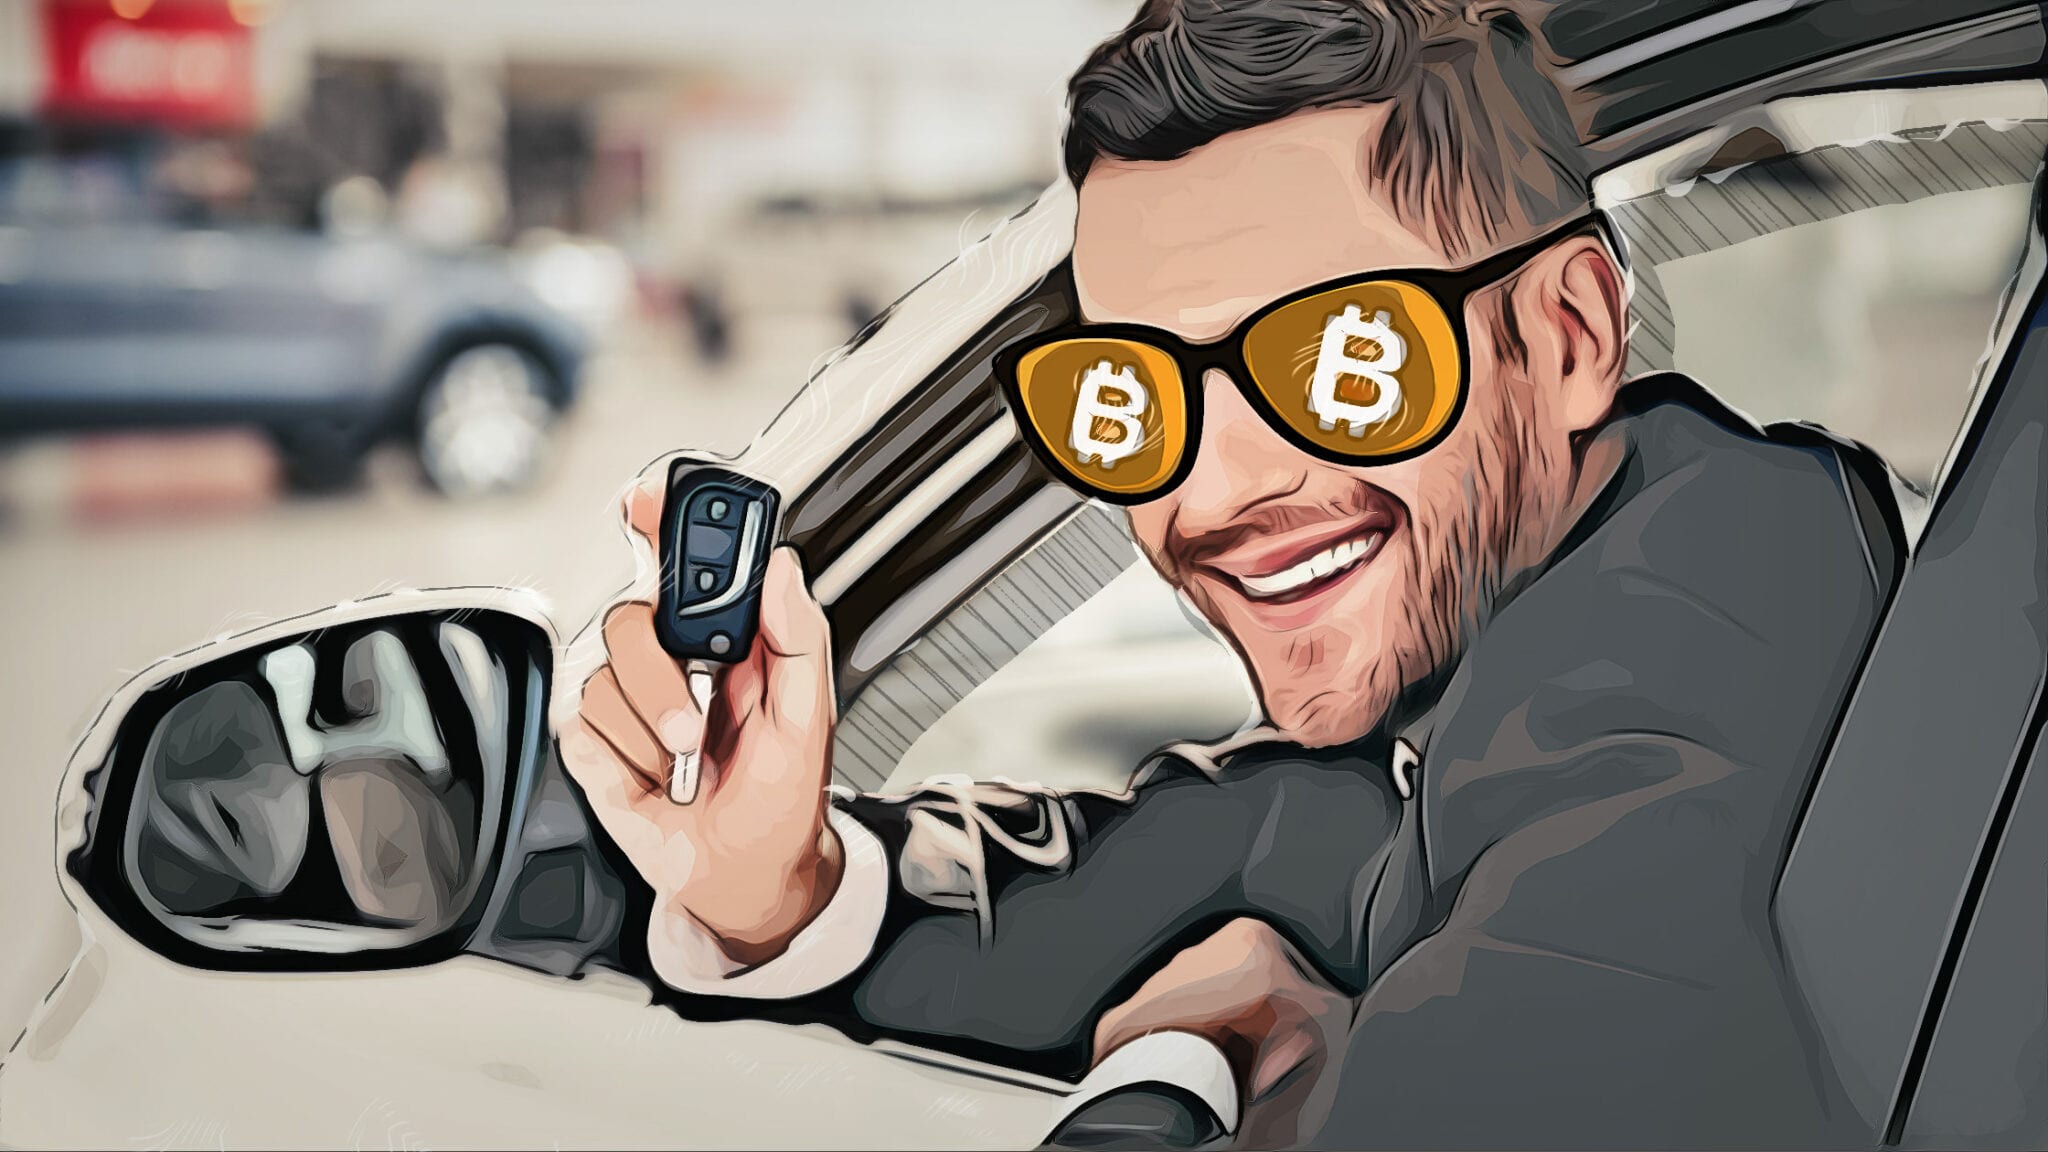 can i buy a car with crypto